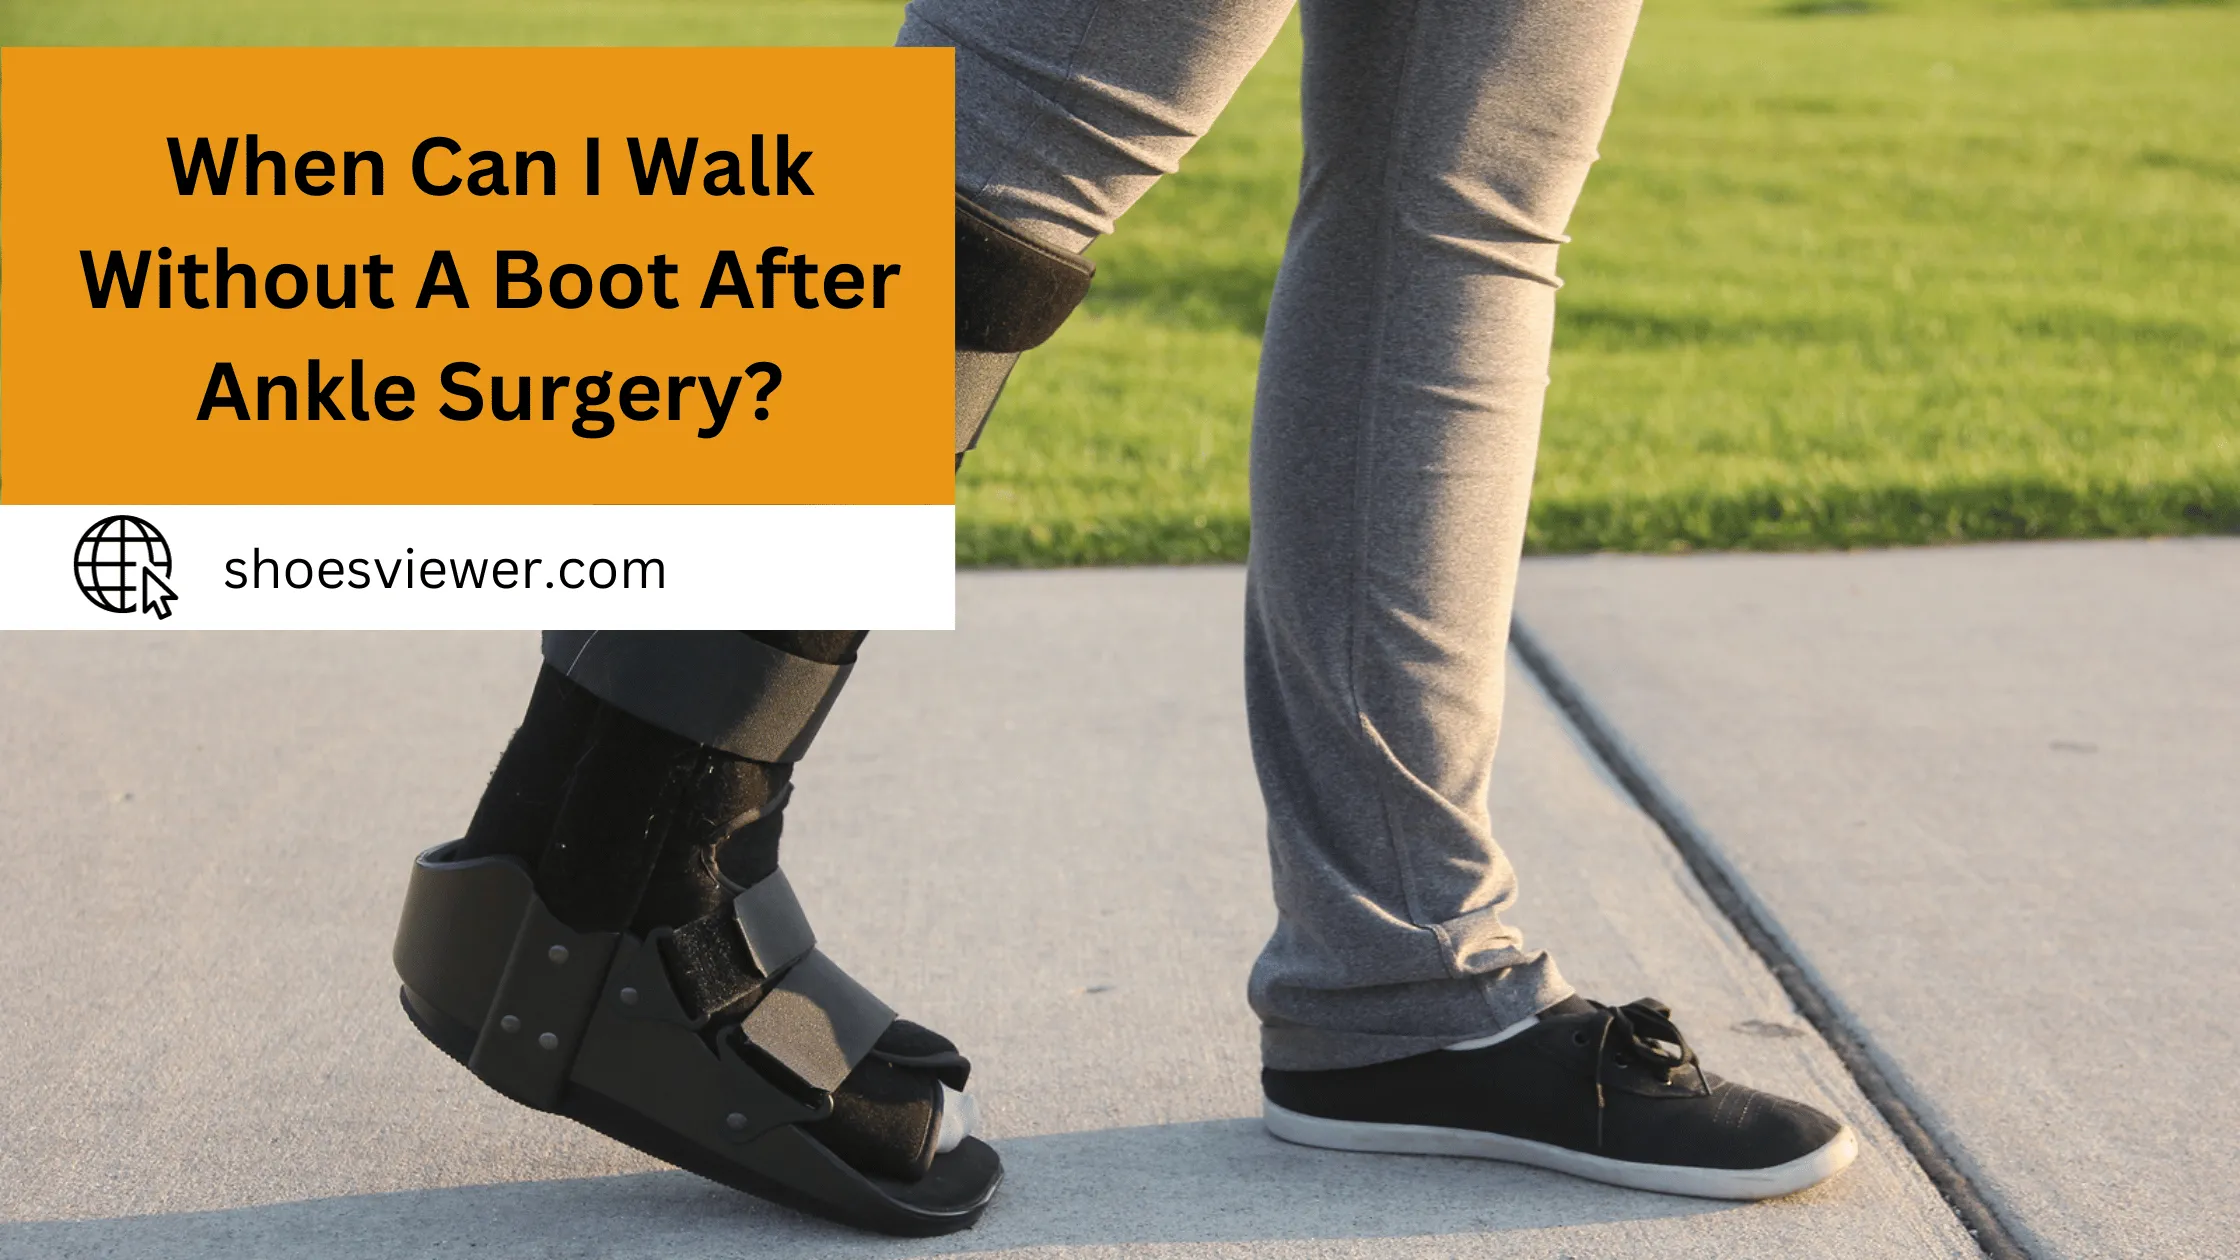 When Can I Walk Without A Boot After Ankle Surgery?